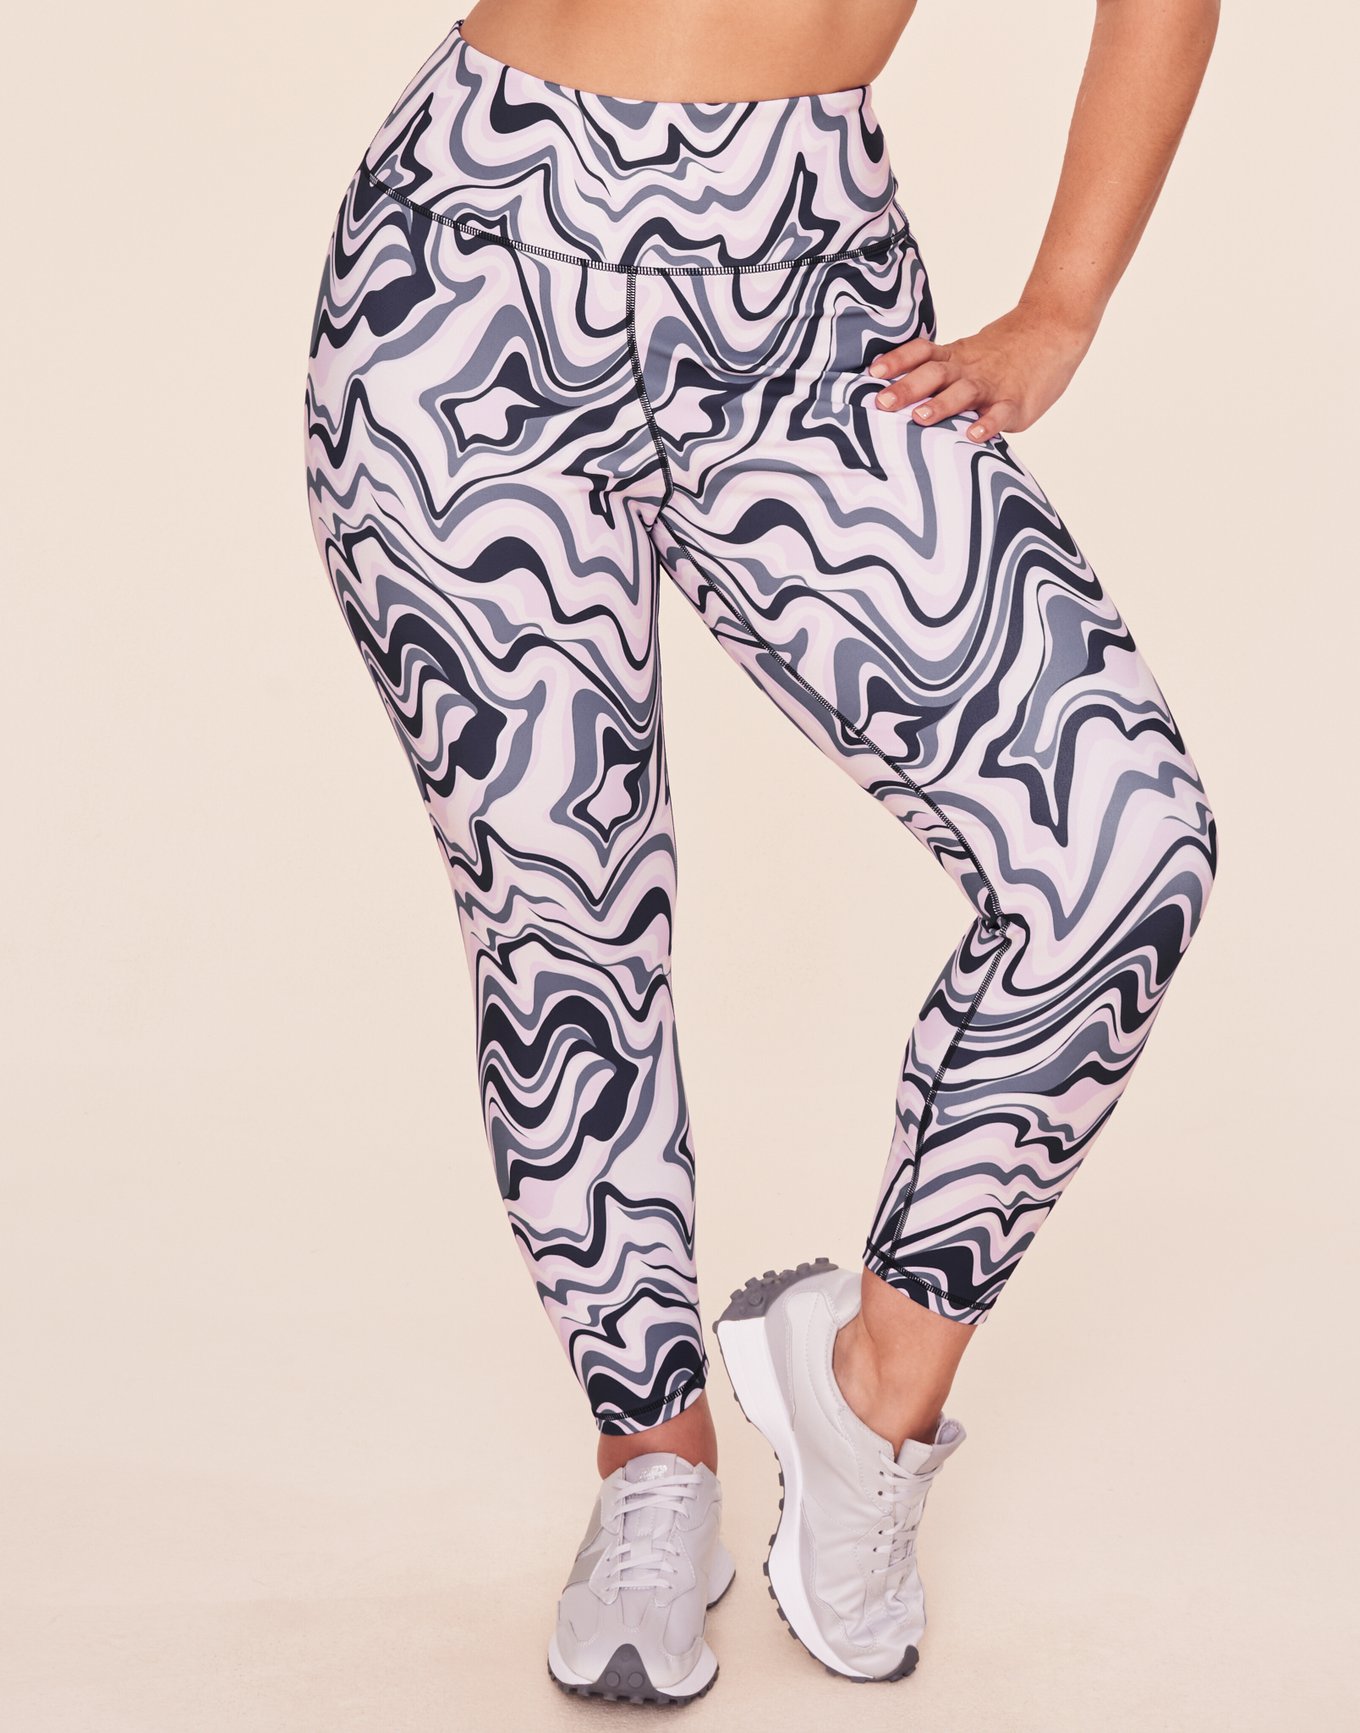 Printed Leggings Manufacturer and Wholesale in China - NDH